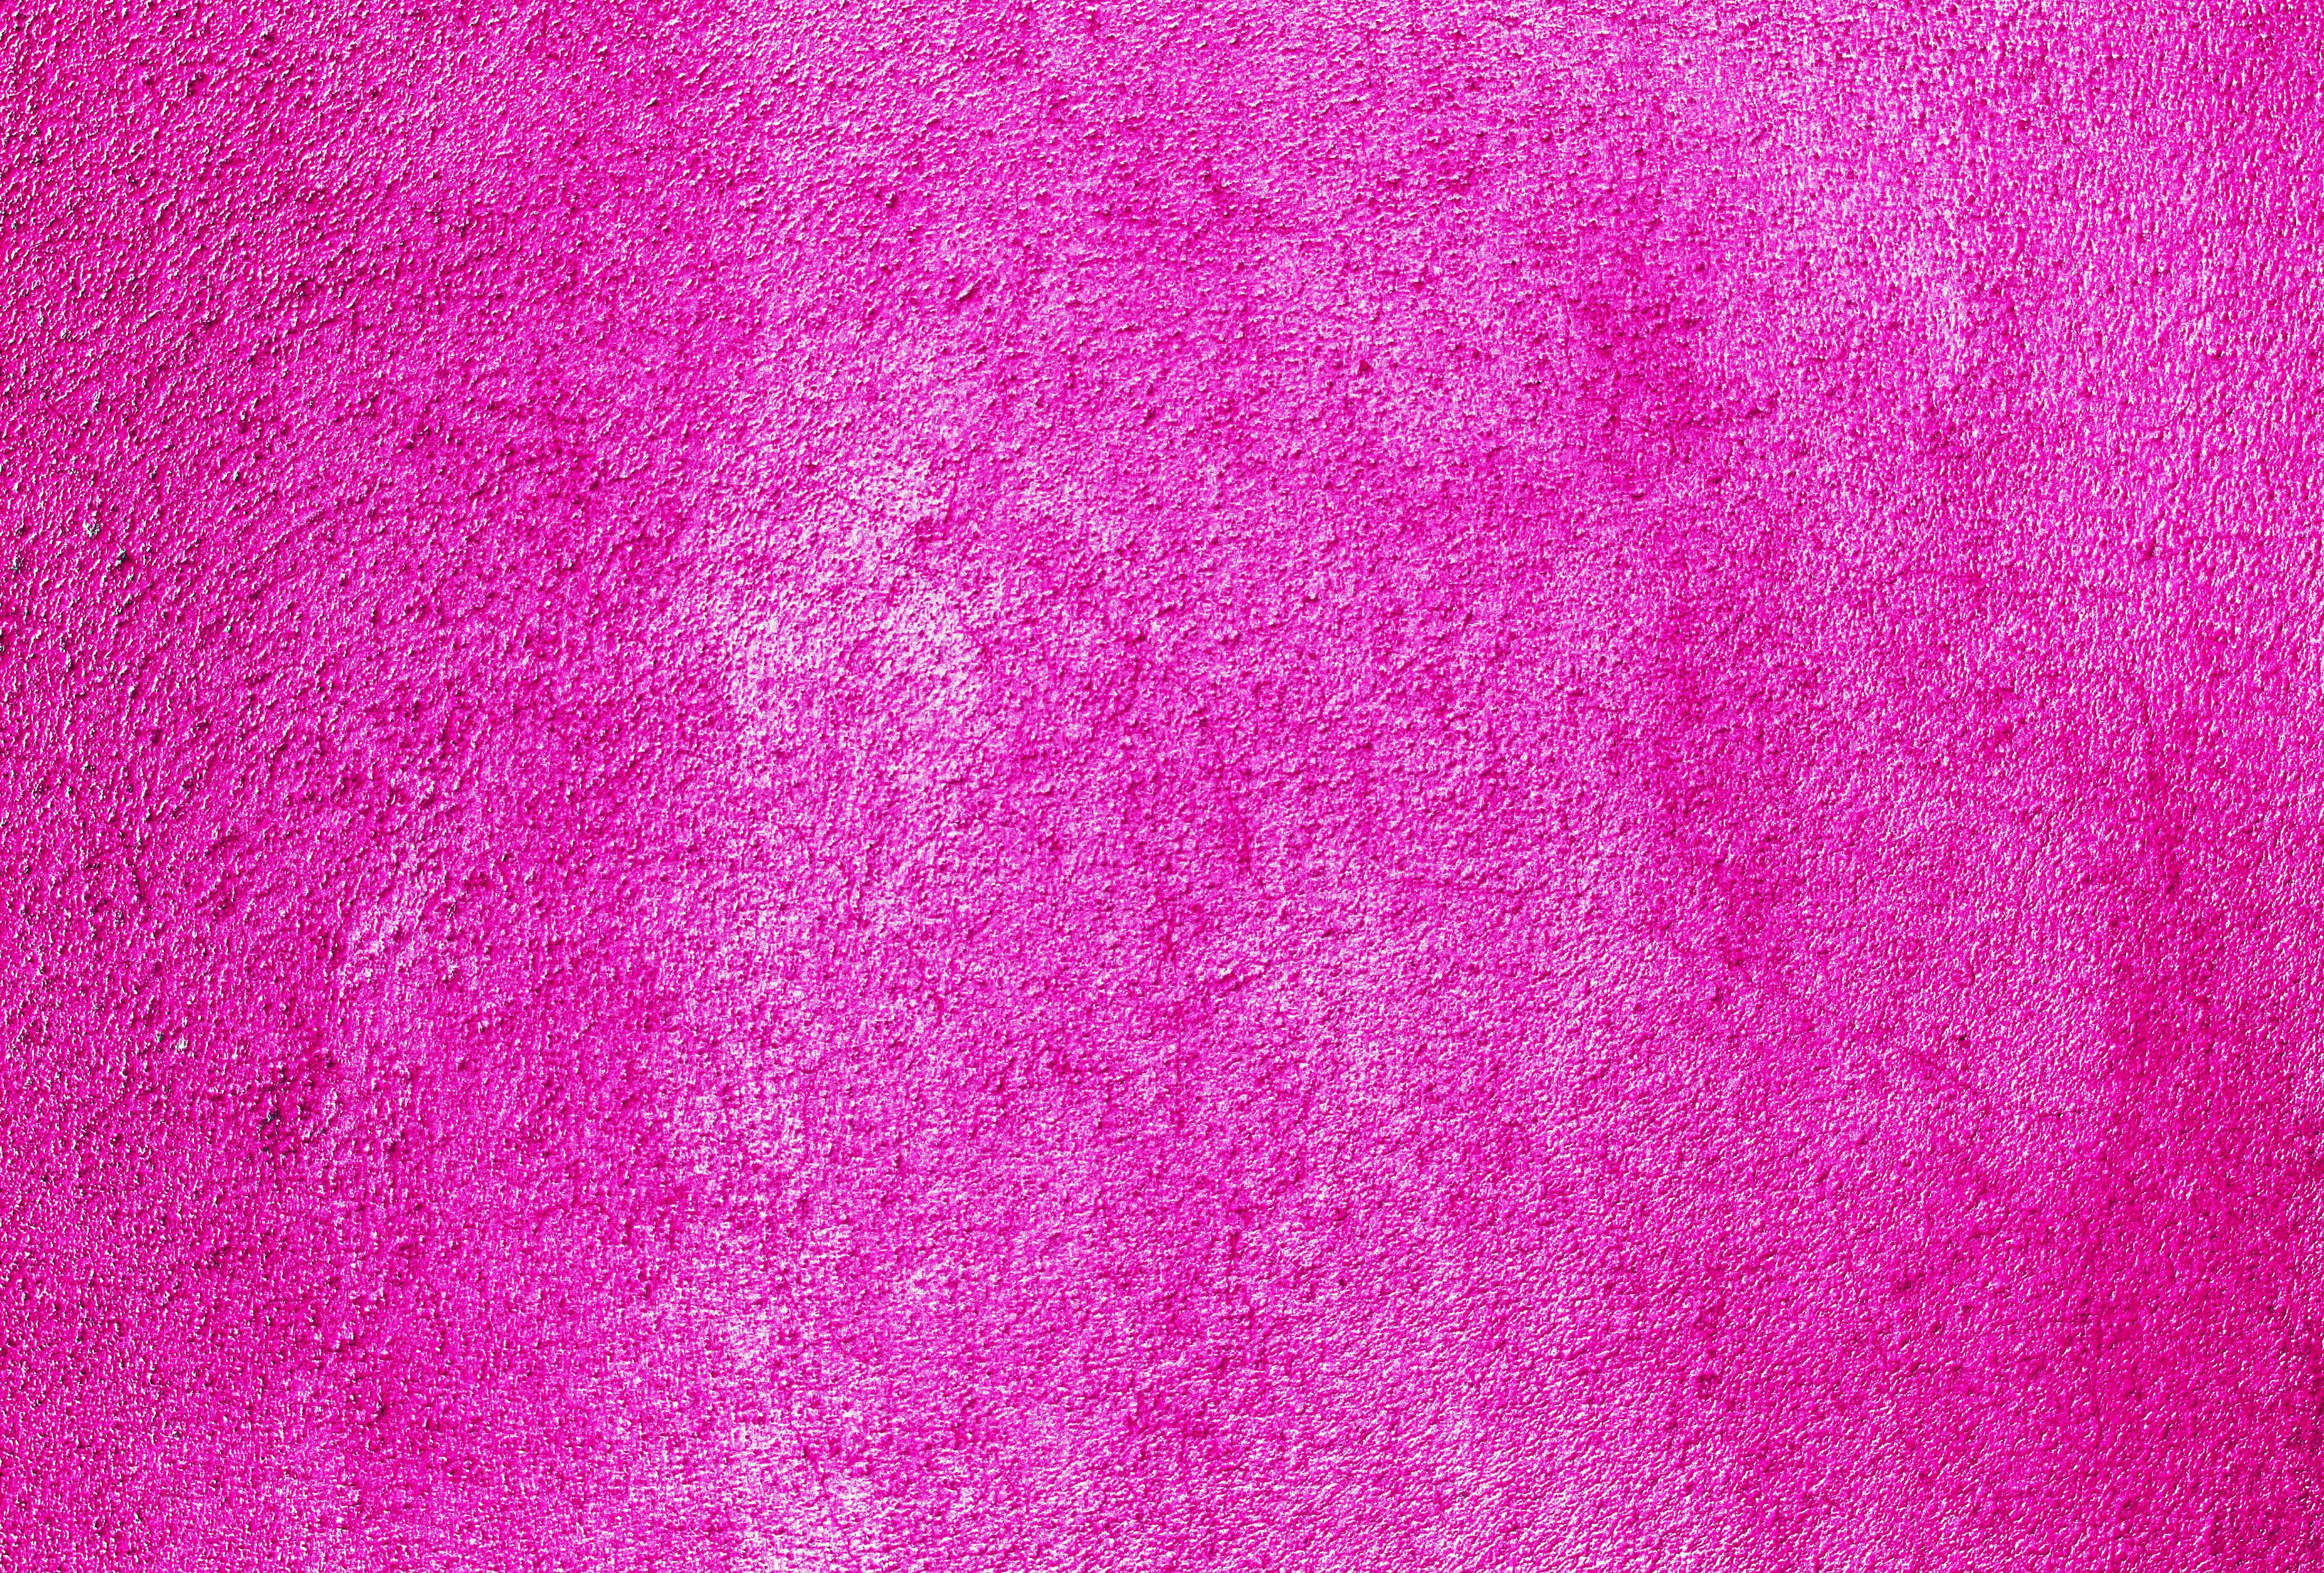 Textured cement wall painted pink